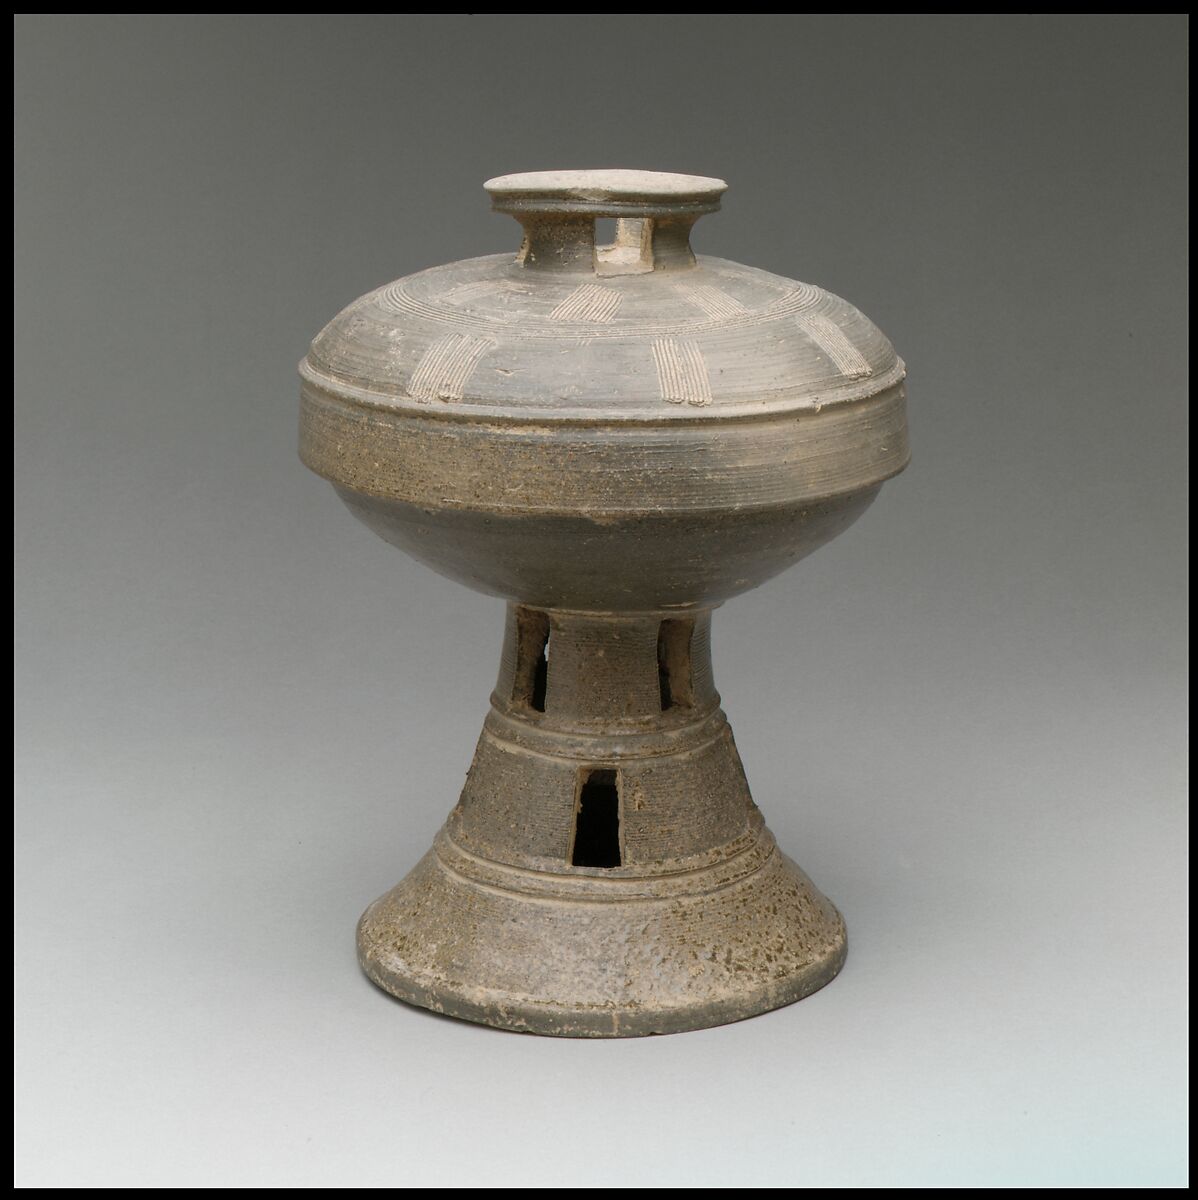 Pedestal dish with cover, Stoneware with traces of incidental ash glaze, Korea 